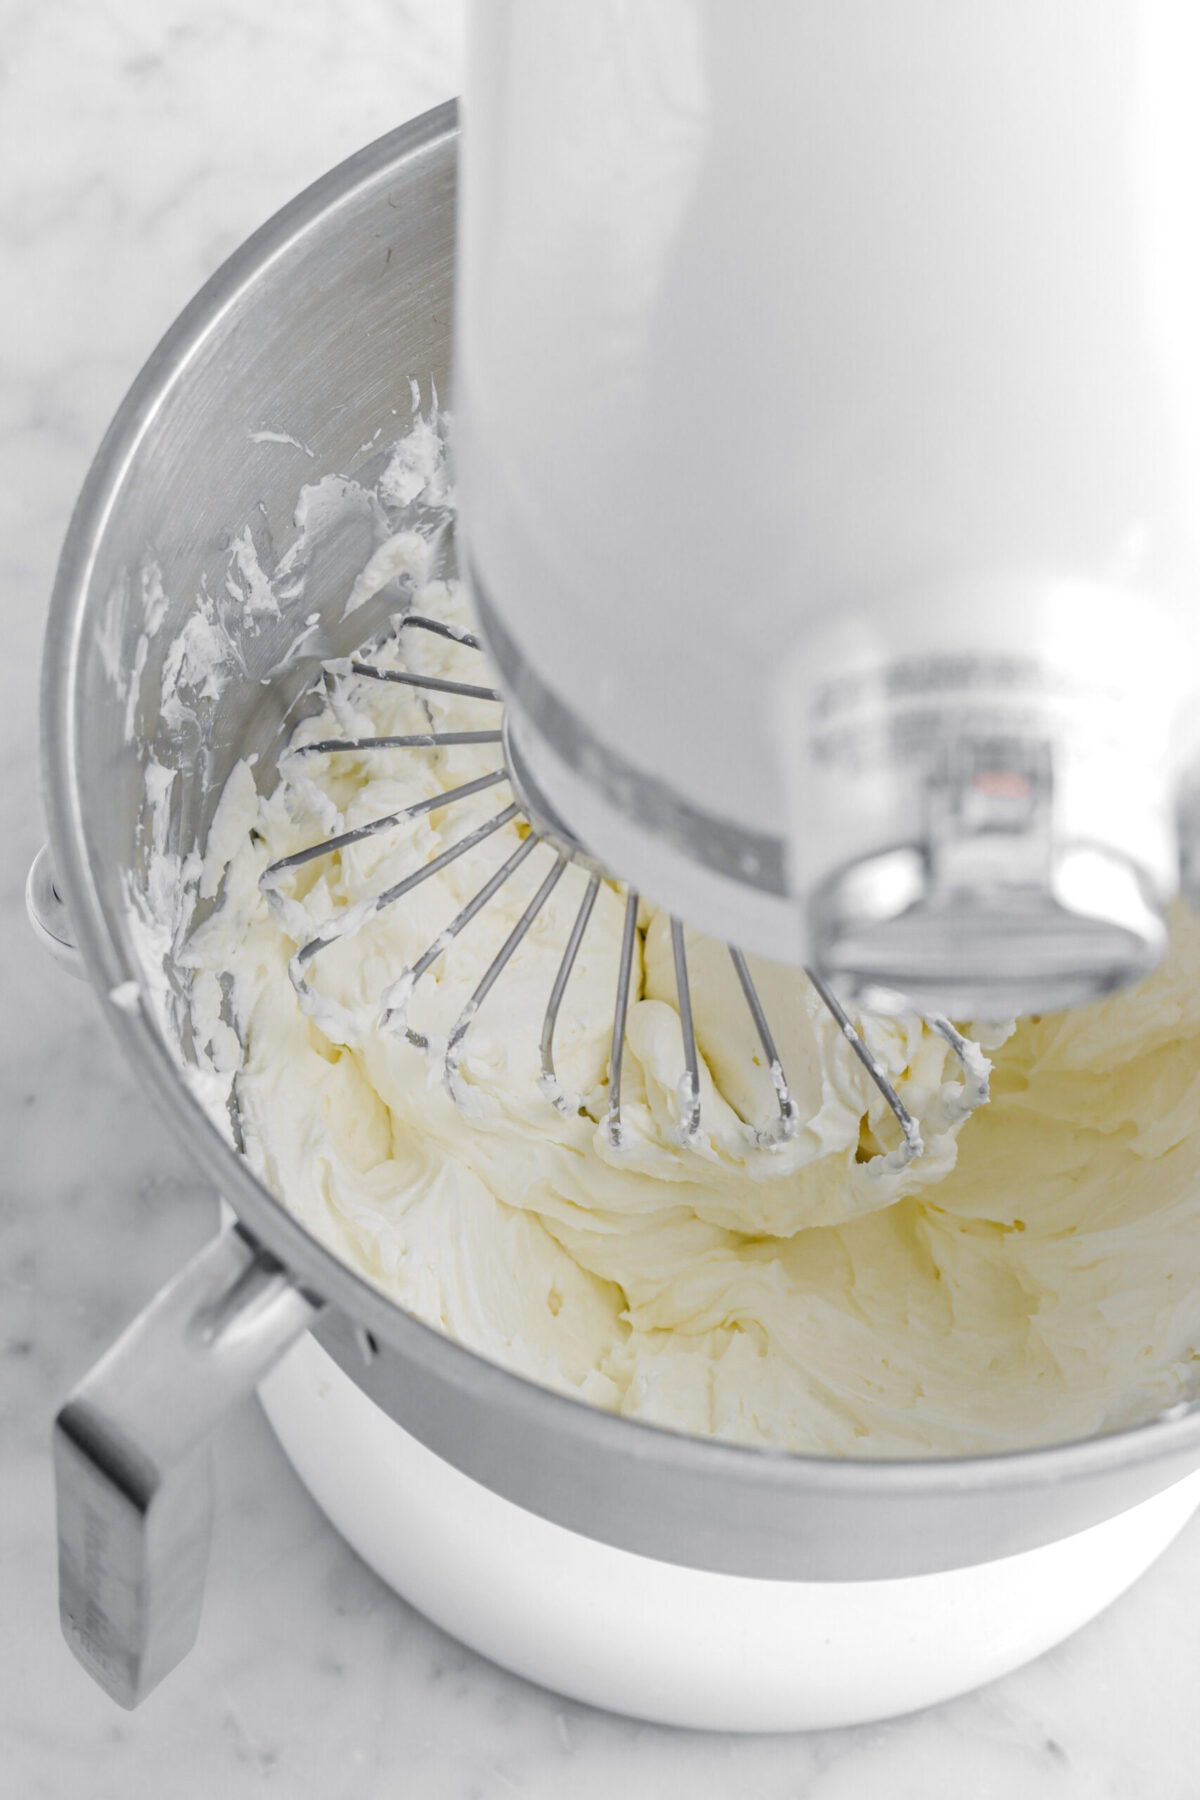 cream cheese and whipped cream mixture in stand mixer.